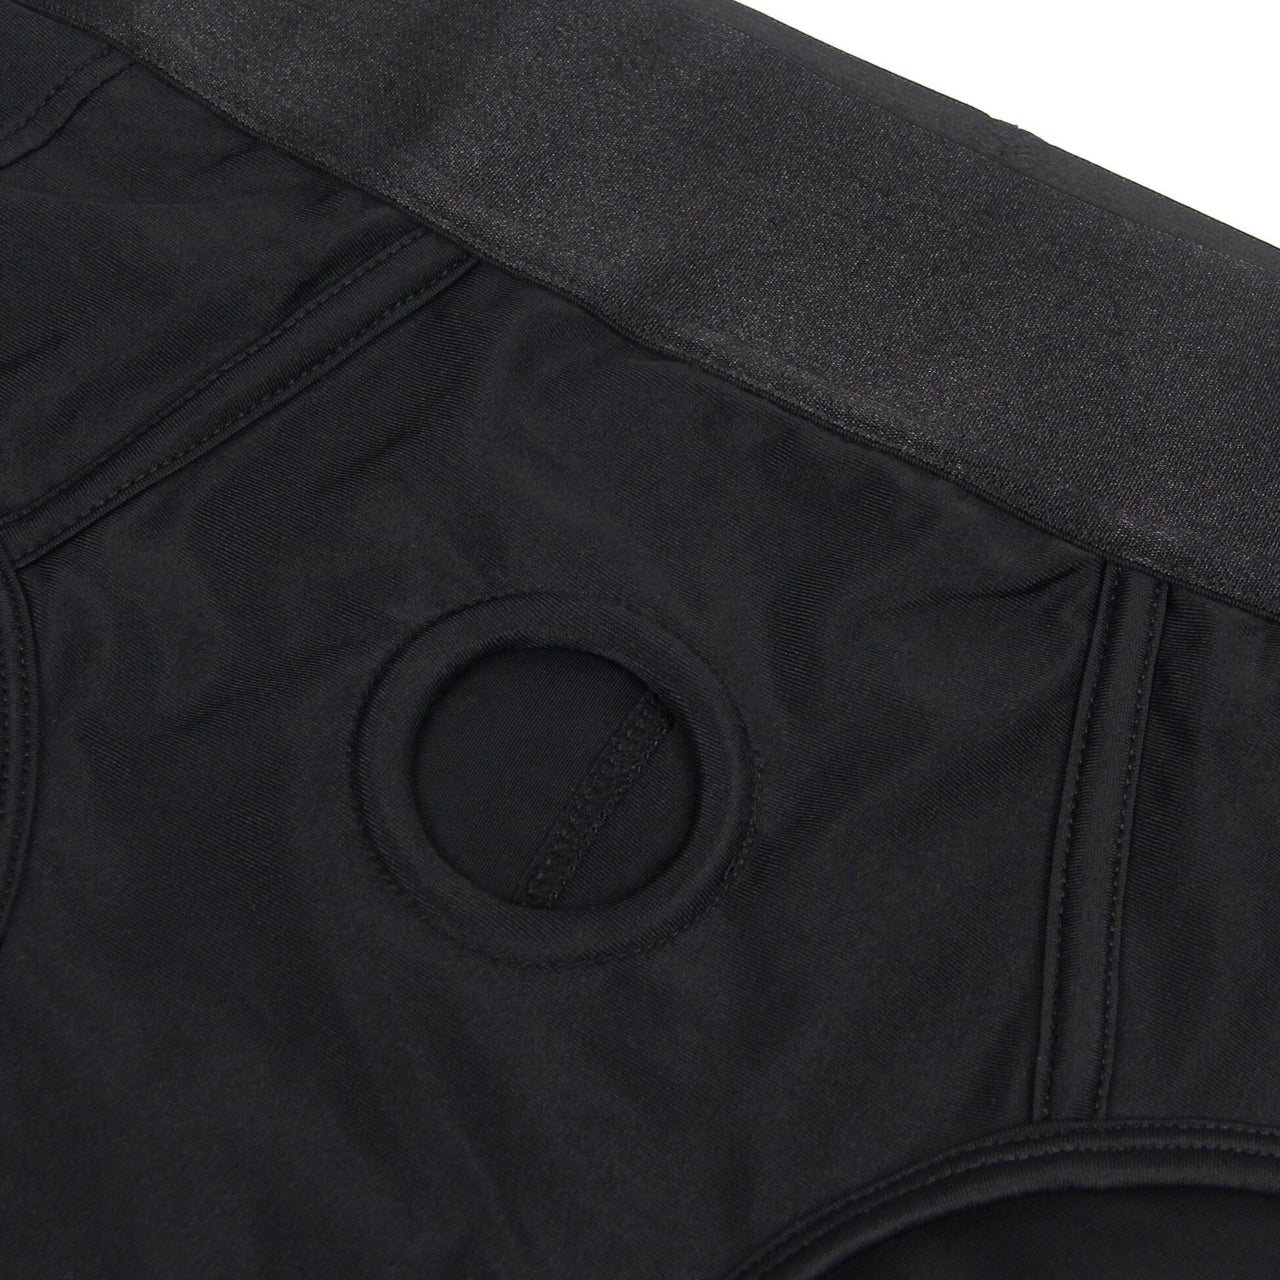 a close up of a pair of black pants